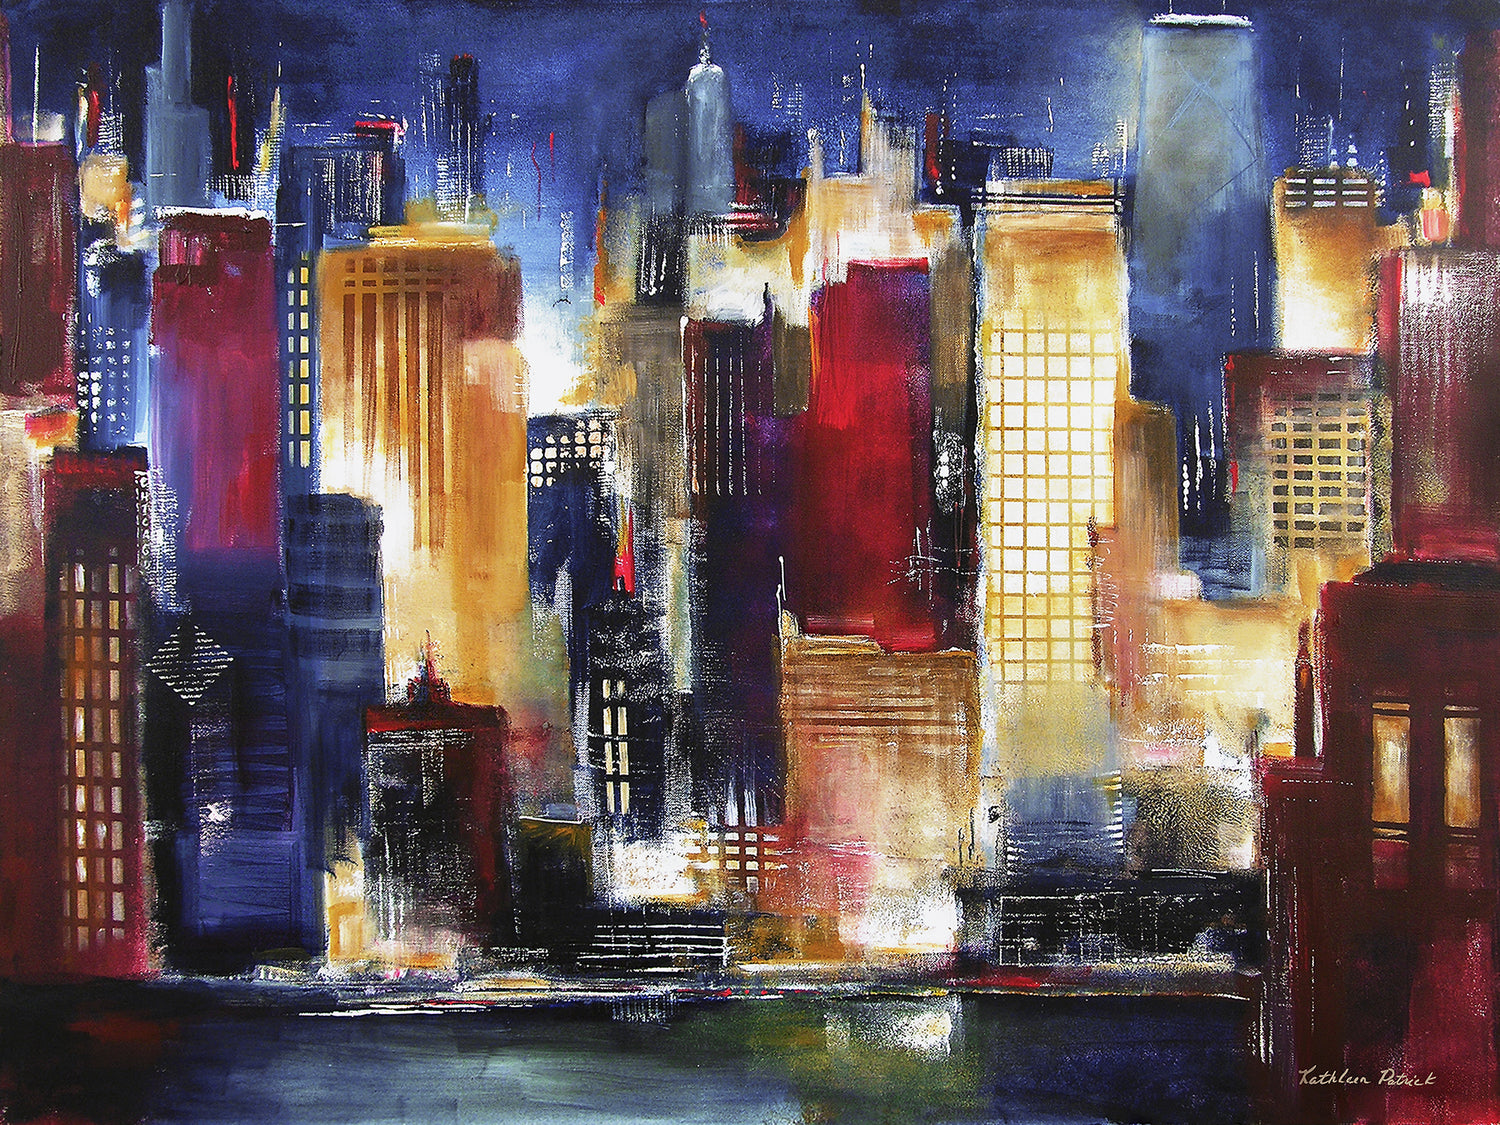 A colorful vibrant Chicago cityscape by artist Kathleen Patrick.